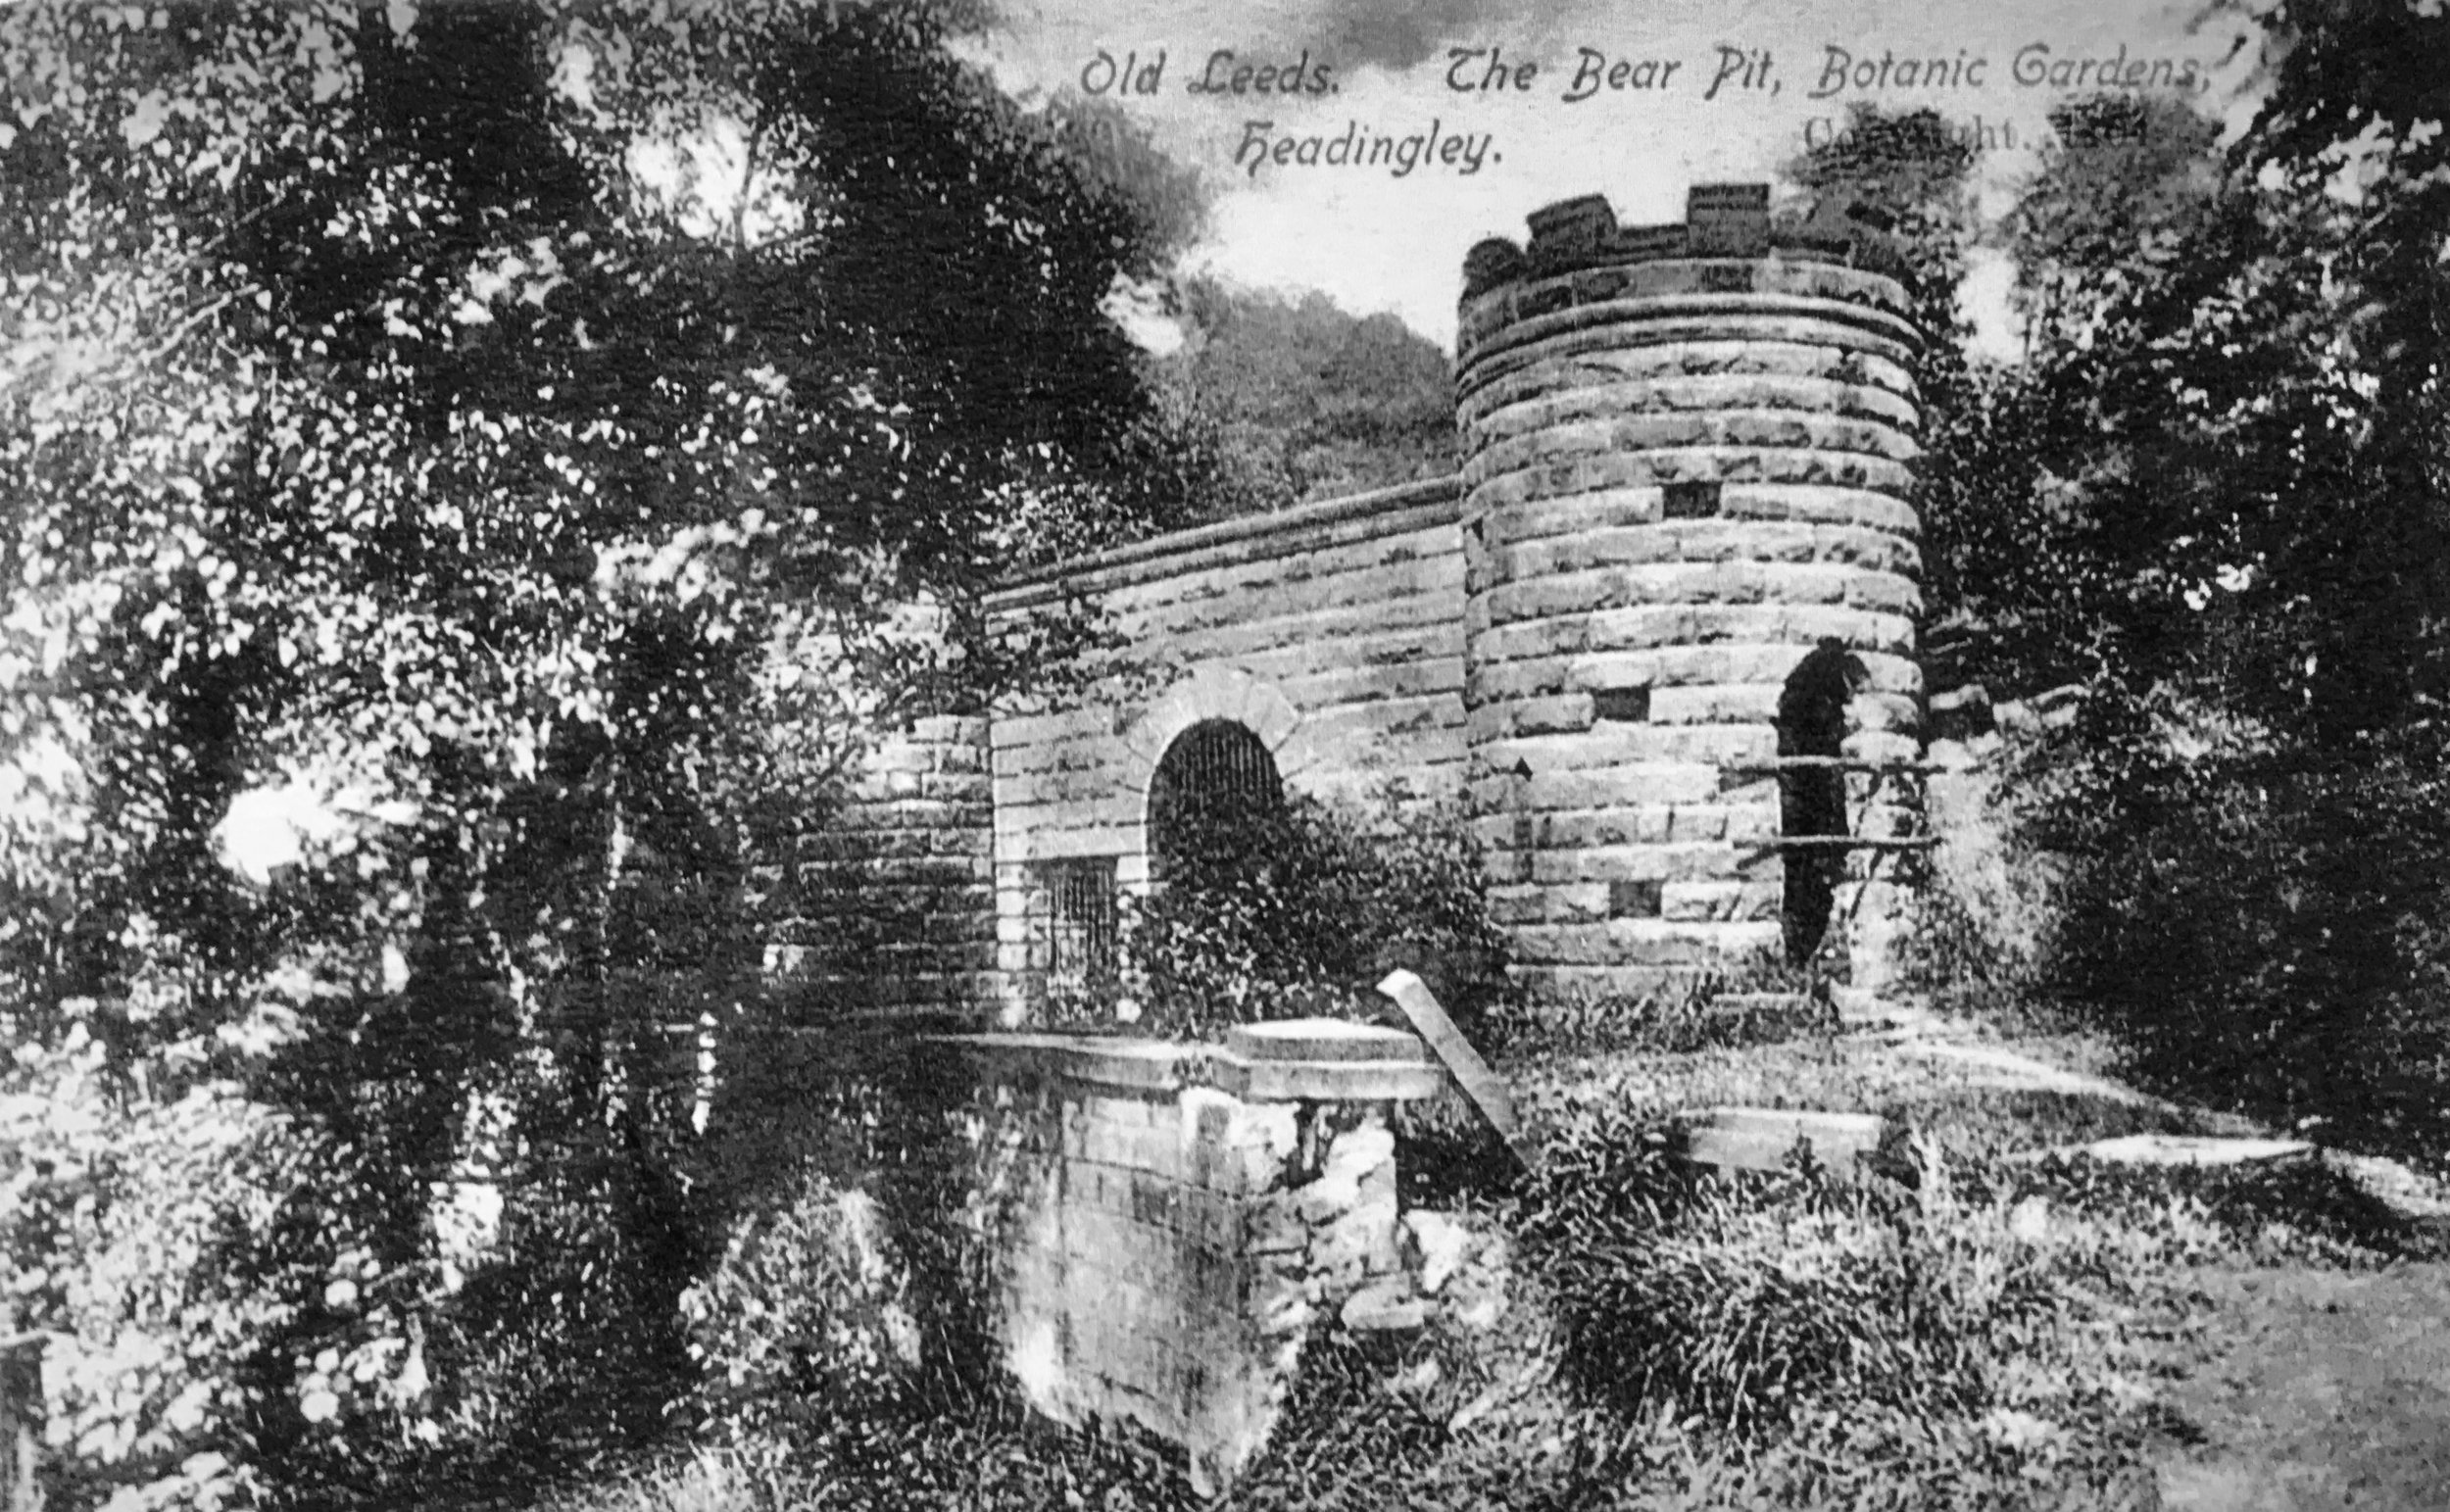 The Bear Pit, installed in the Gardens, 1841